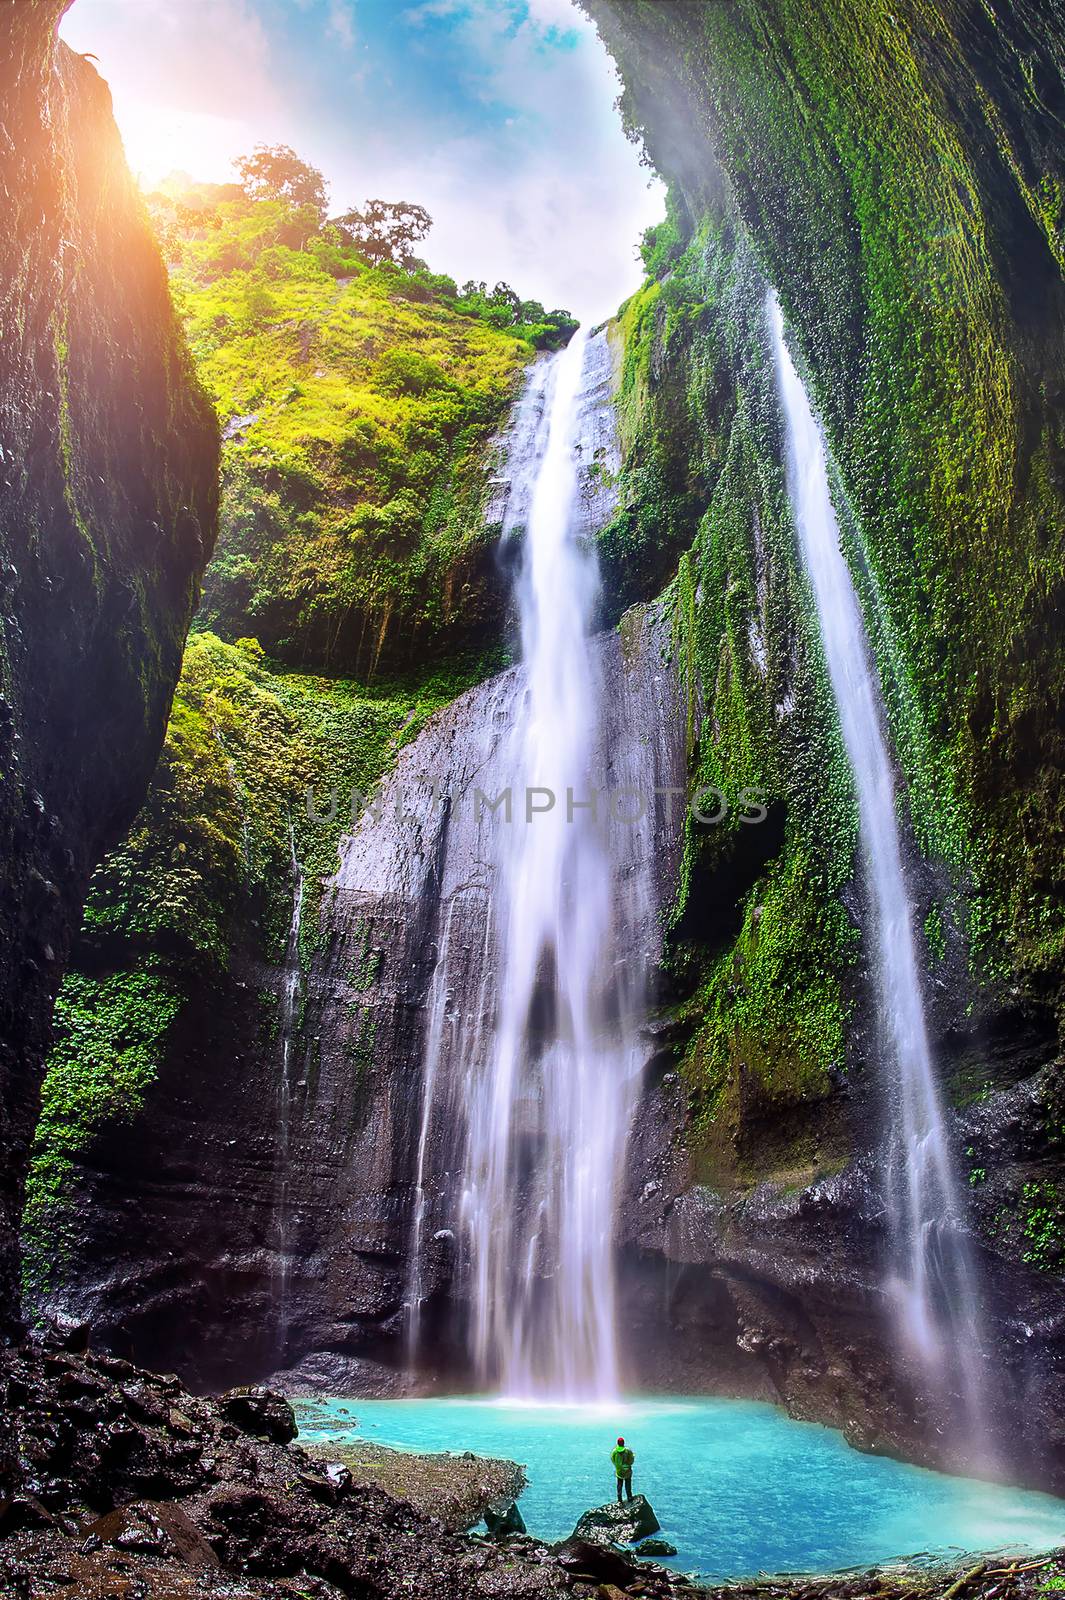 Madakaripura Waterfall is the tallest waterfall in Java and the  by gutarphotoghaphy